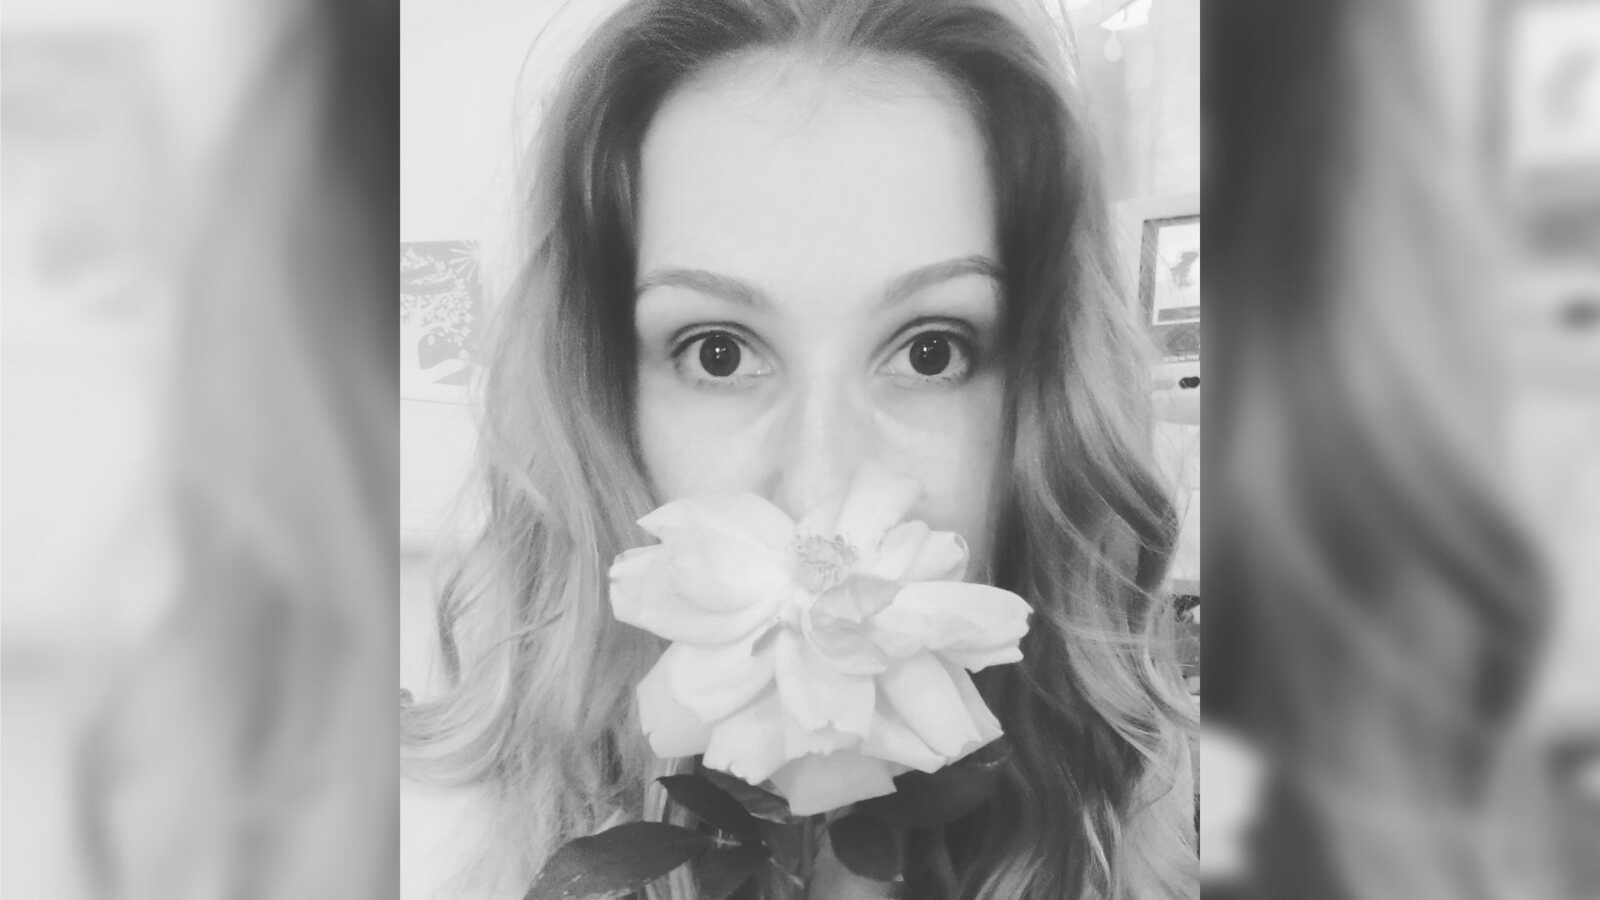 Woman holds a rose in front of her nose in black and white selfie.